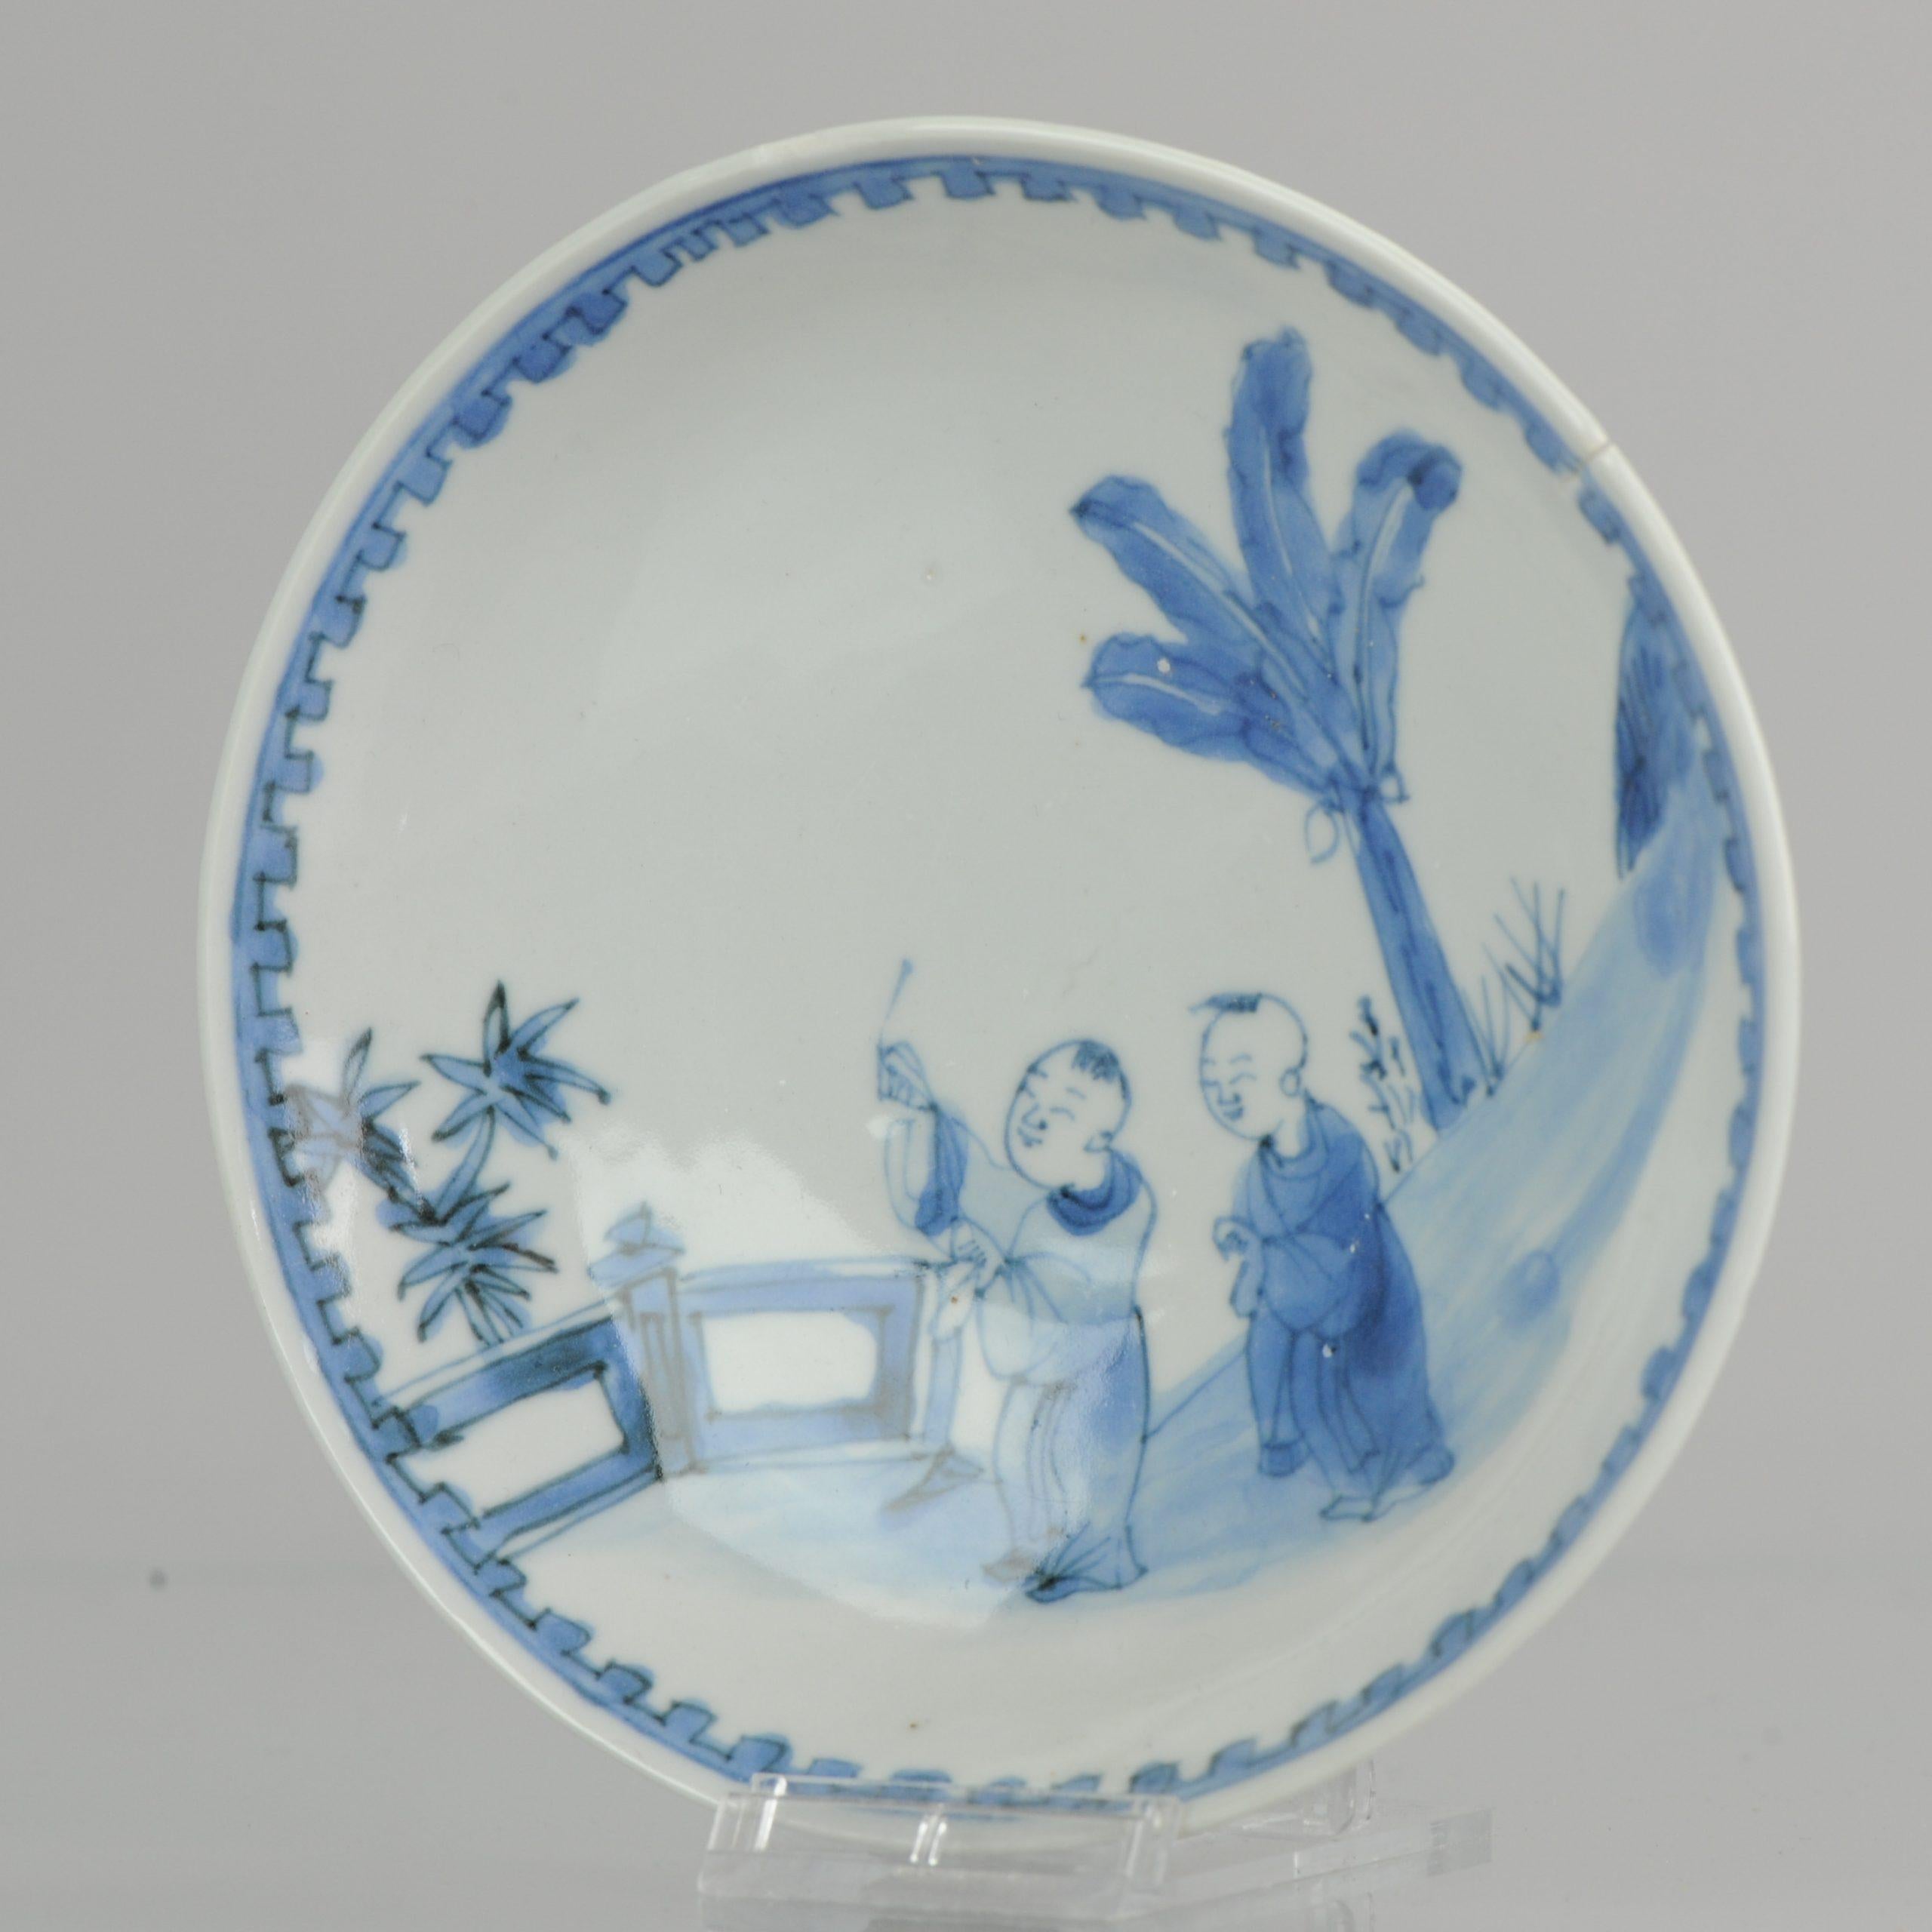 A very nicely decorated plate. Late Ming. Boys playing

For similar examples of this listing see:

S. Marchant & Son (2008). Ming Porcelain for the Japanese Market: ko-sometsuke & ko-akaI. S. Marchant & Son.

 

 

 

